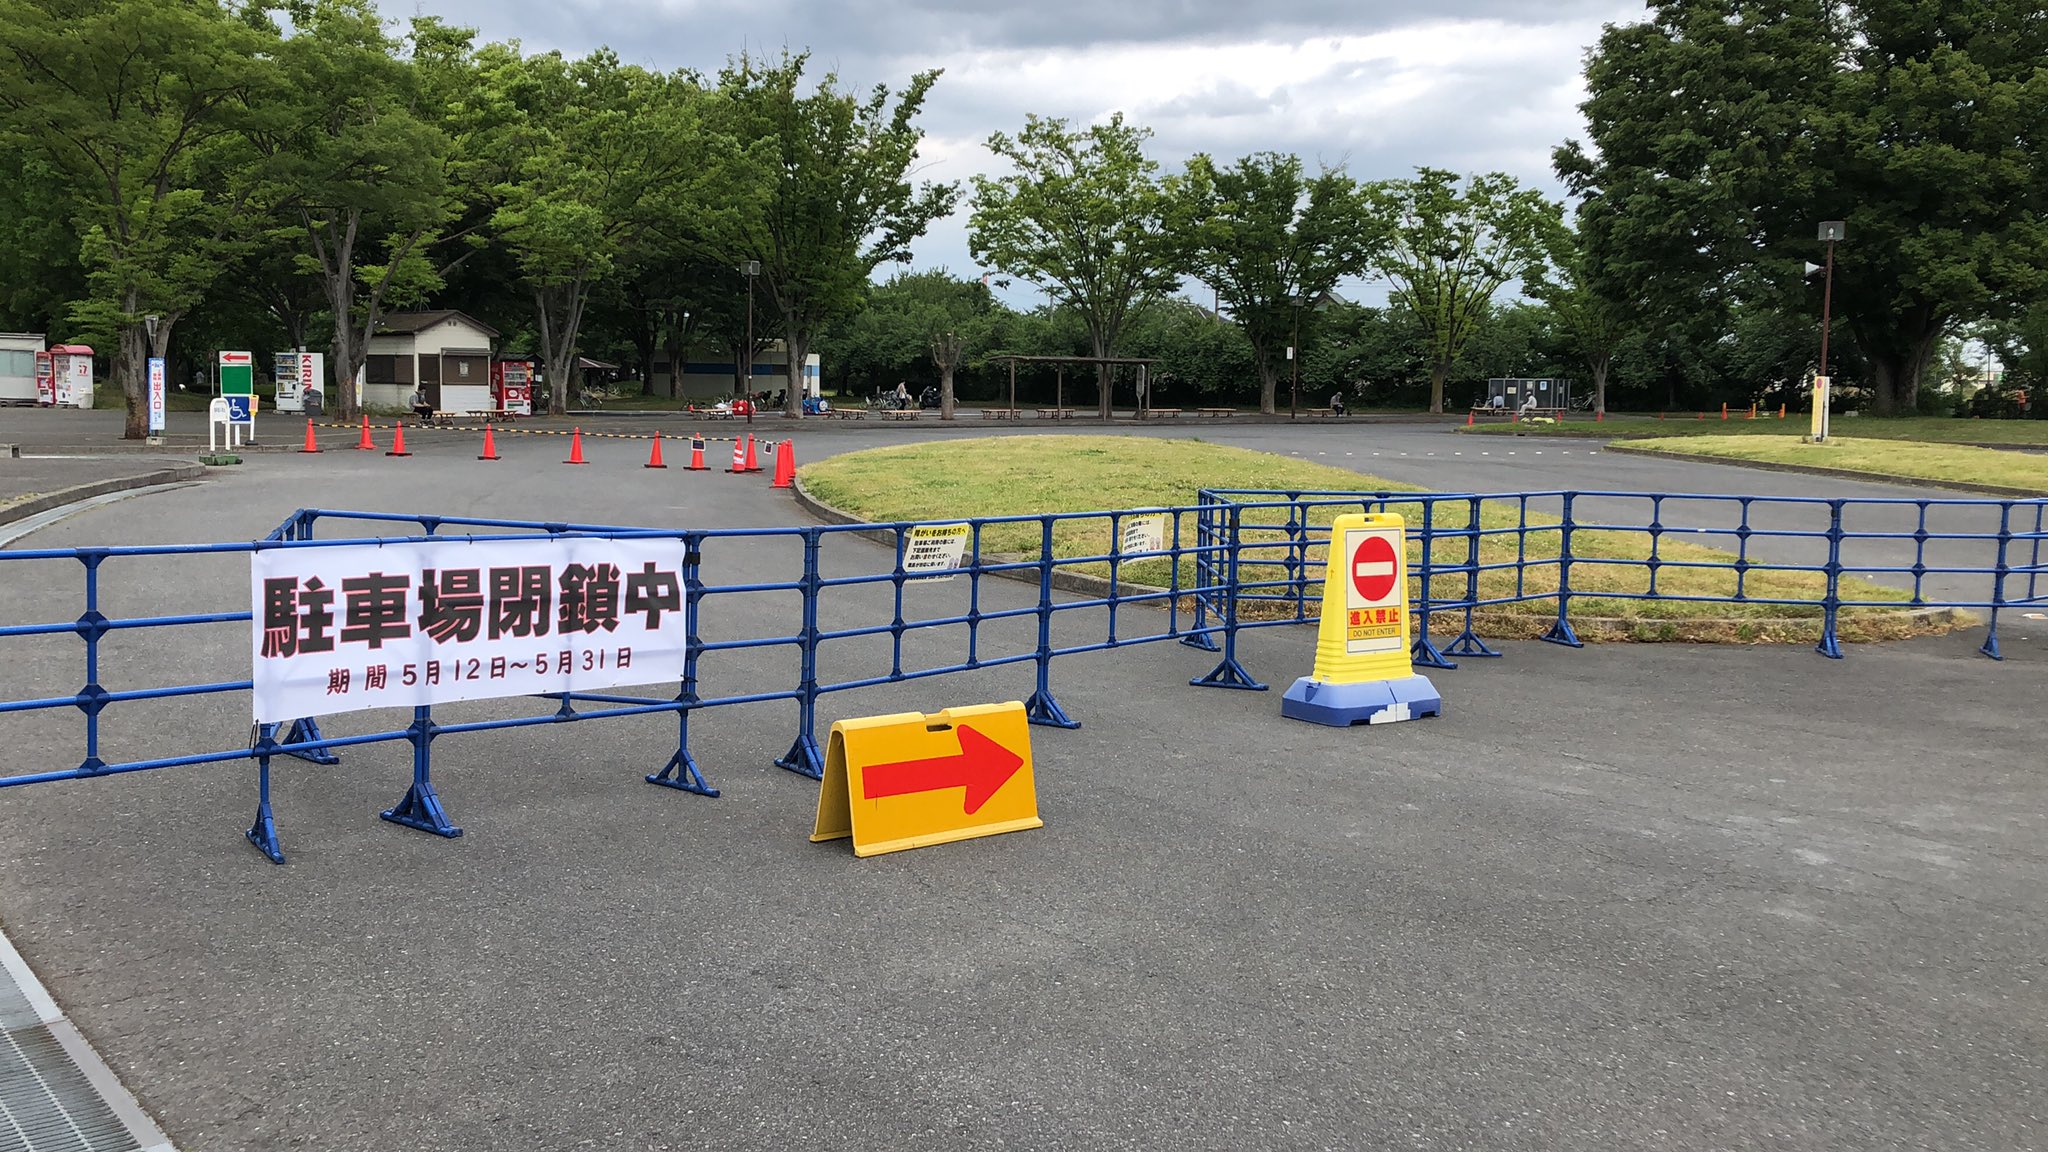 Nobuhito T 川越水上公園の駐車場は閉鎖中 公園は閉鎖してないんで徒歩 バイク 自転車はok T Co Htwgnz84a1 Twitter